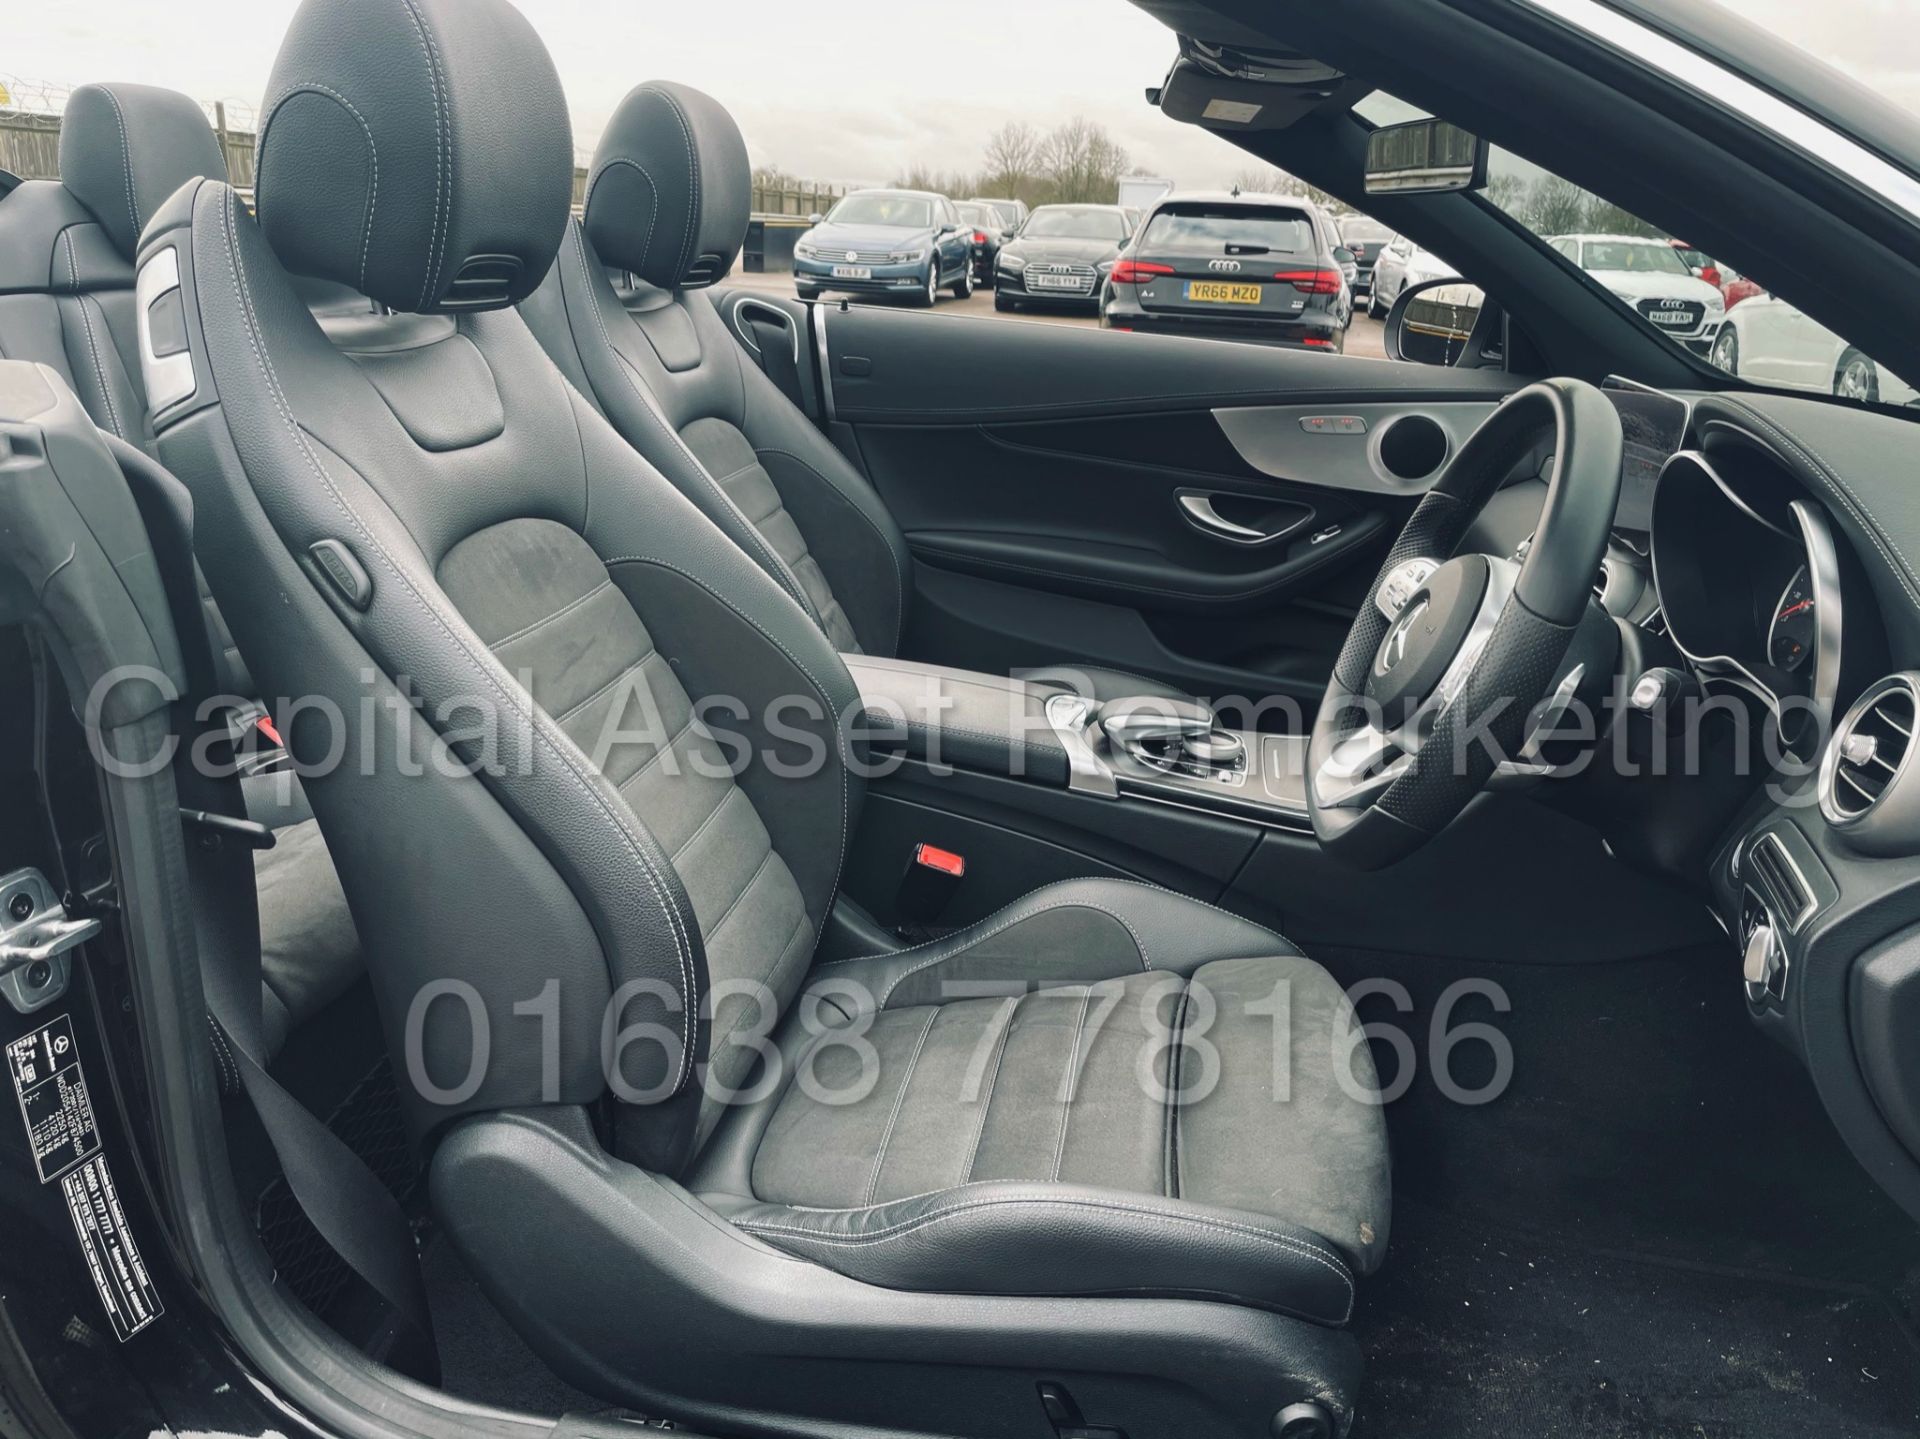 (ON SALE) MERCEDES-BENZ C220D *AMG LINE - CABRIOLET* (2019) '9G TRONIC AUTO - LEATHER - SAT NAV' - Image 42 of 56